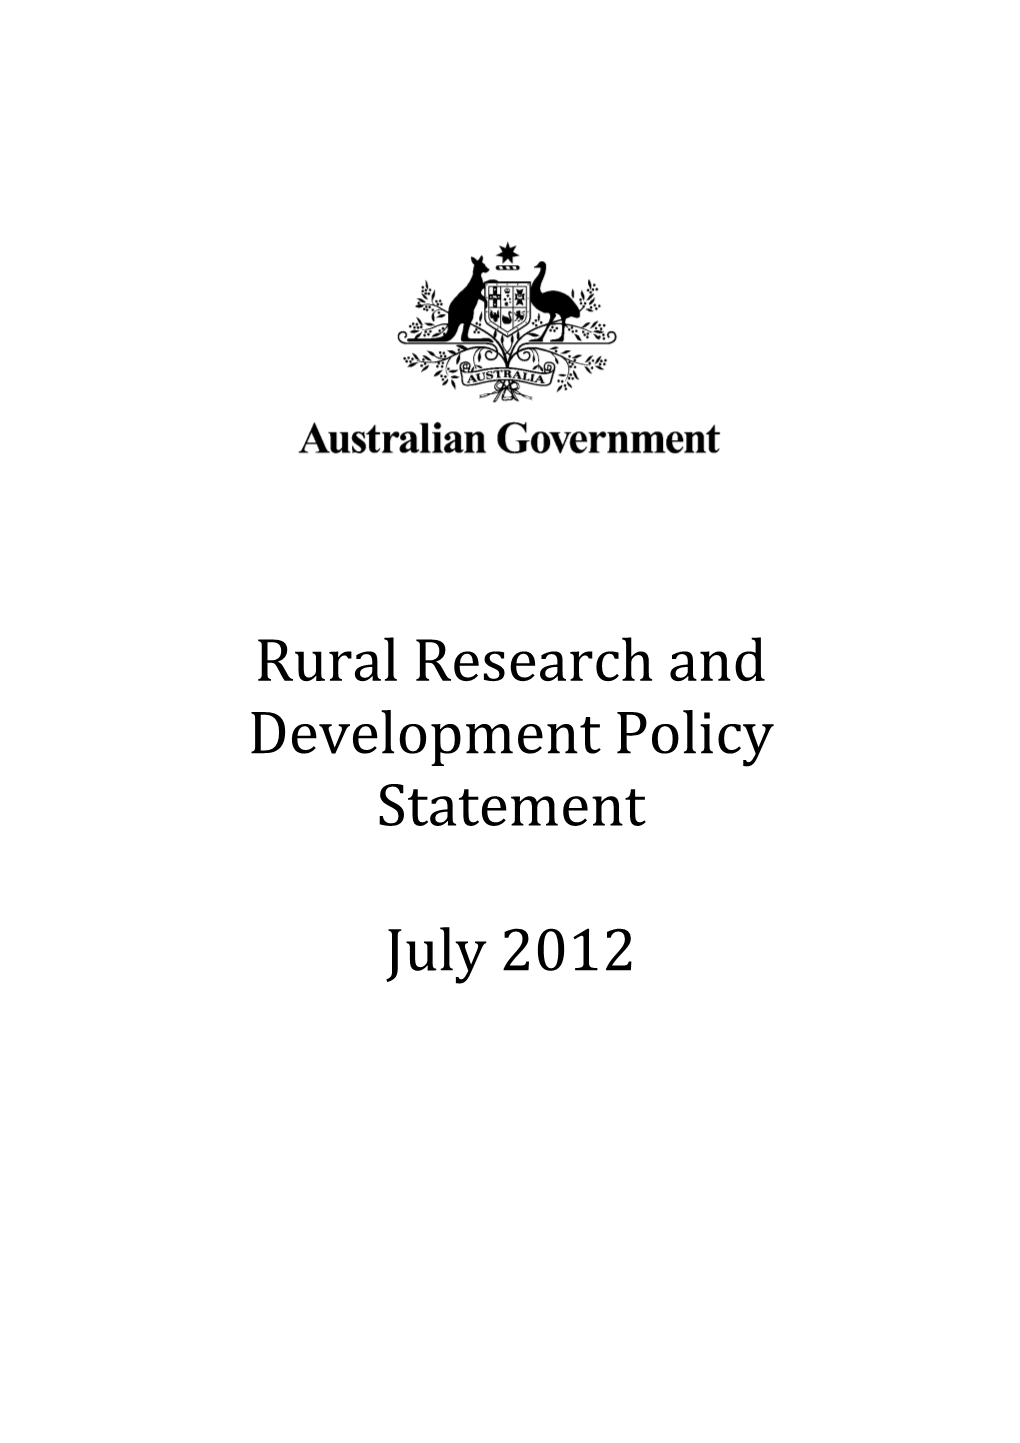 Rural Research and Development Policy Statement